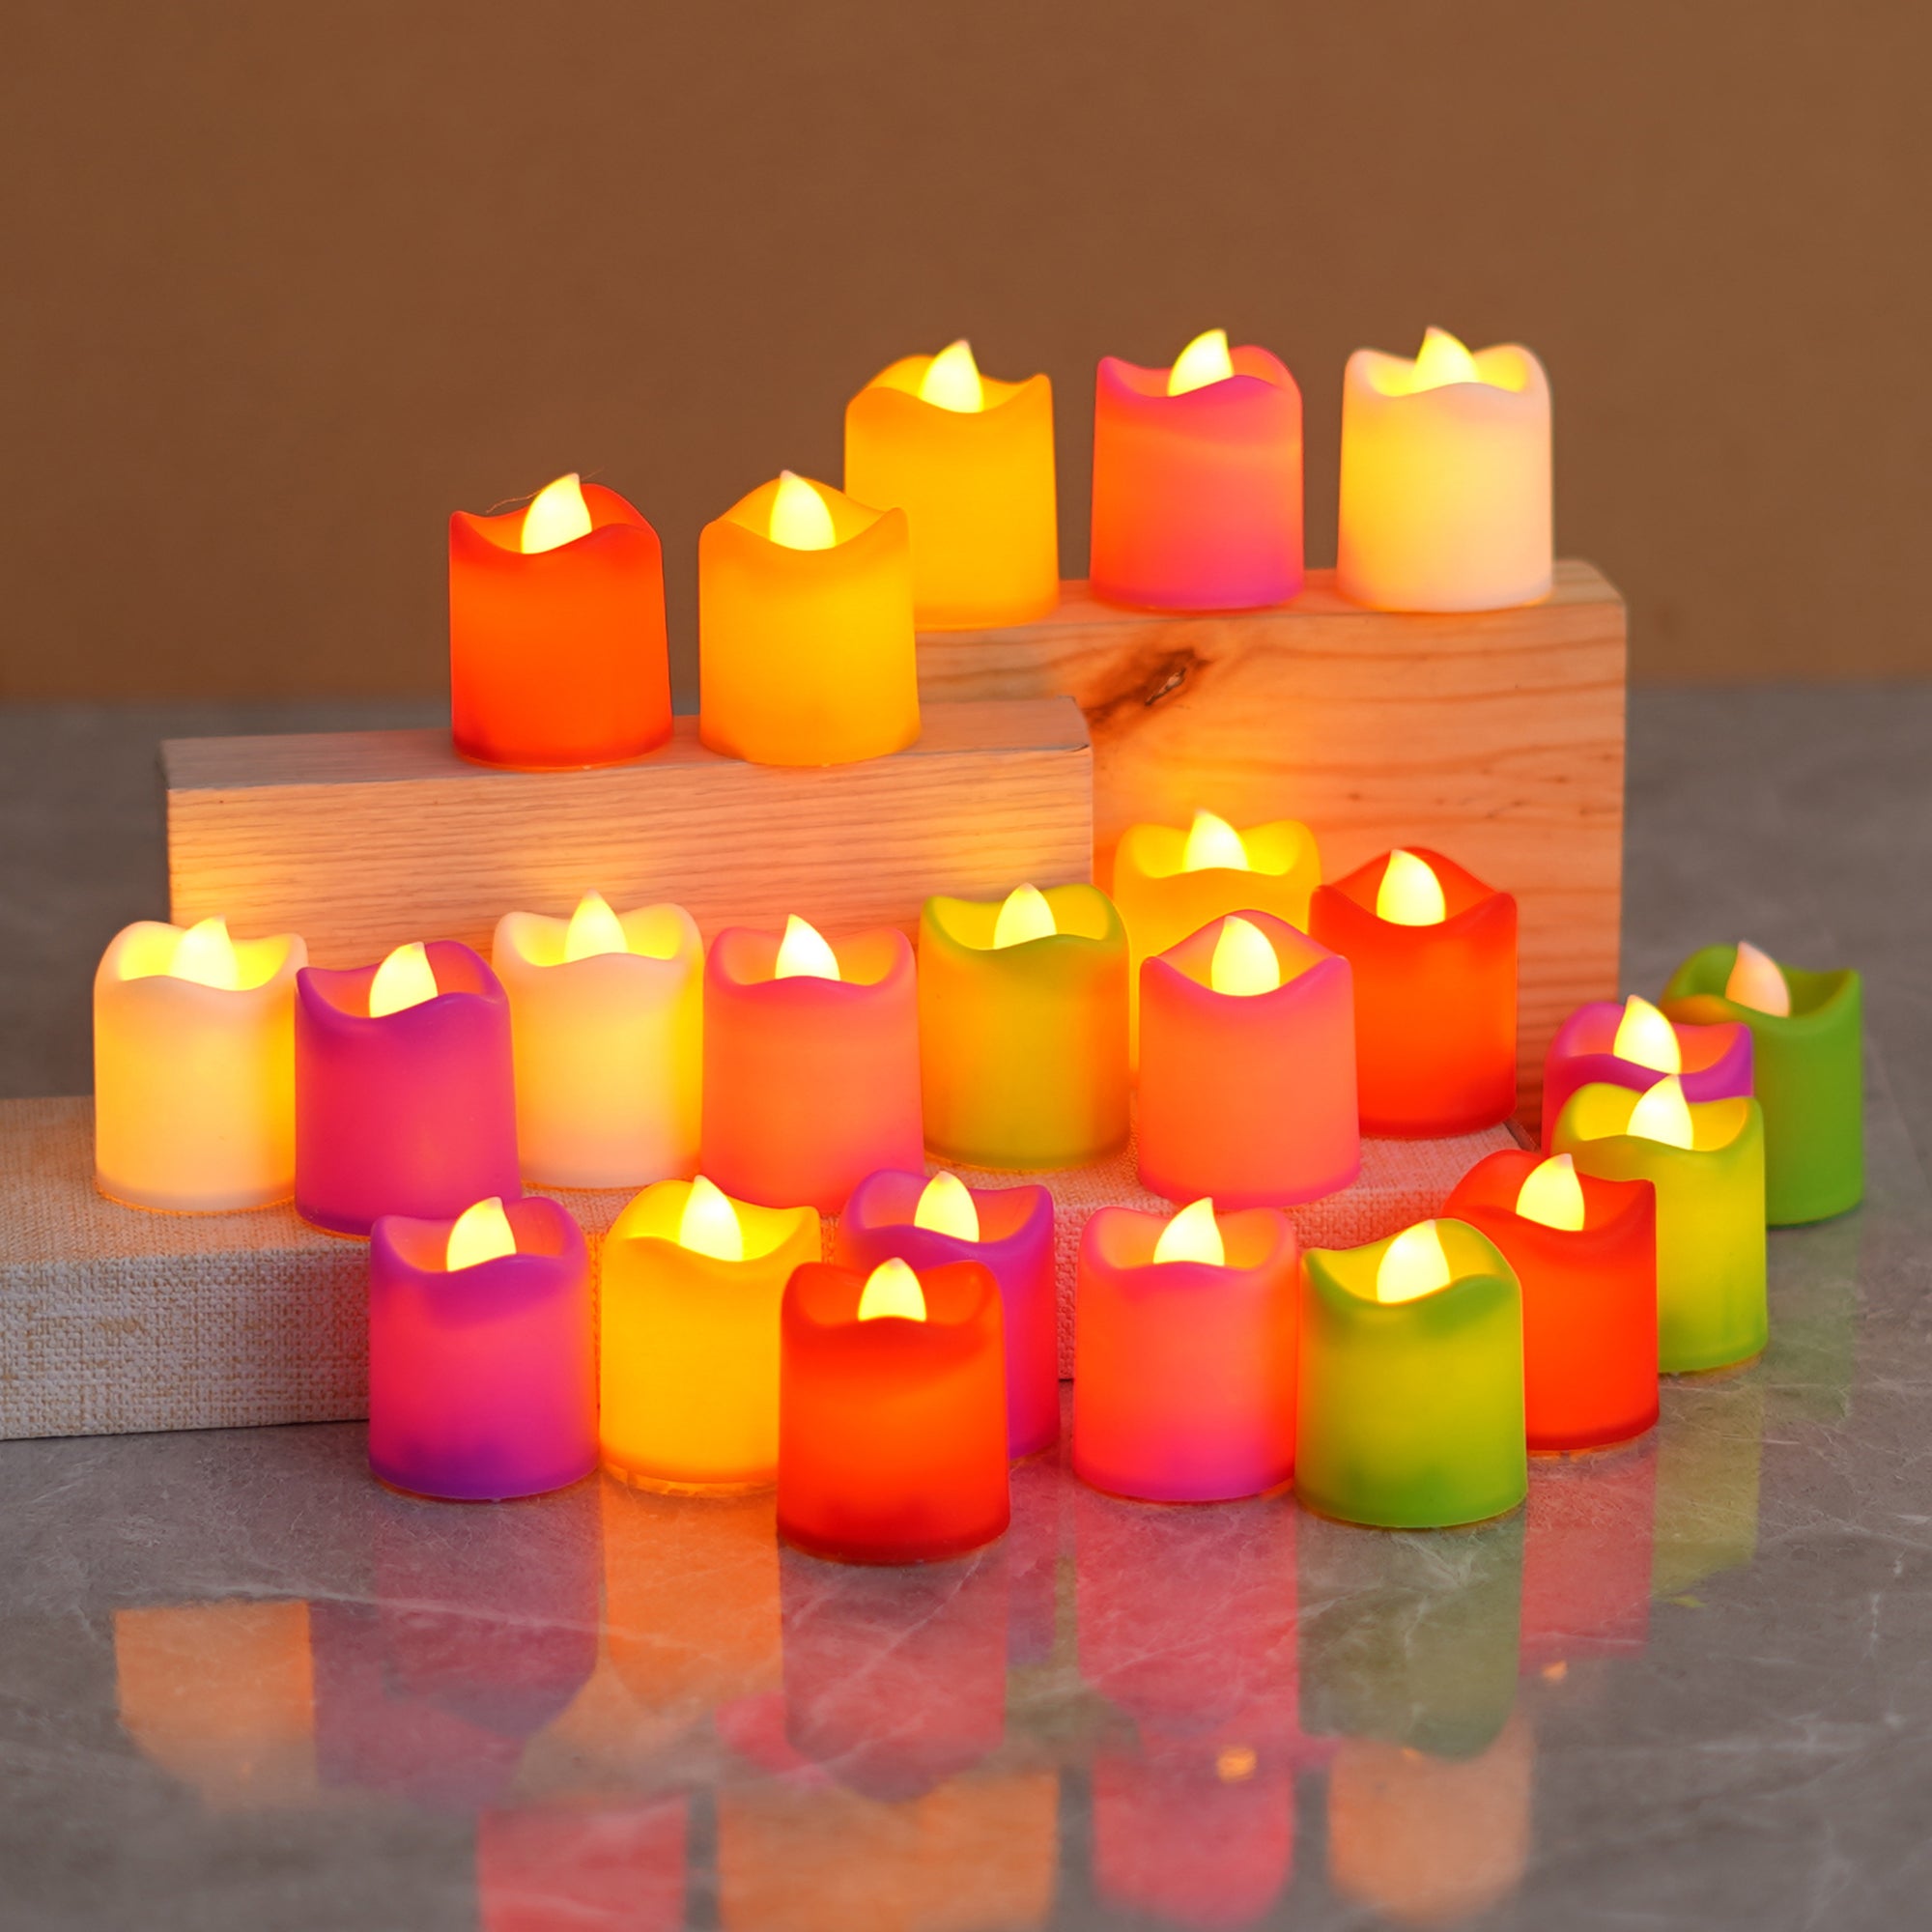 eCraftIndia Multicolor Flameless and Smokeless LED Tea Light Candles for Home Decoration (Set of 24) 4